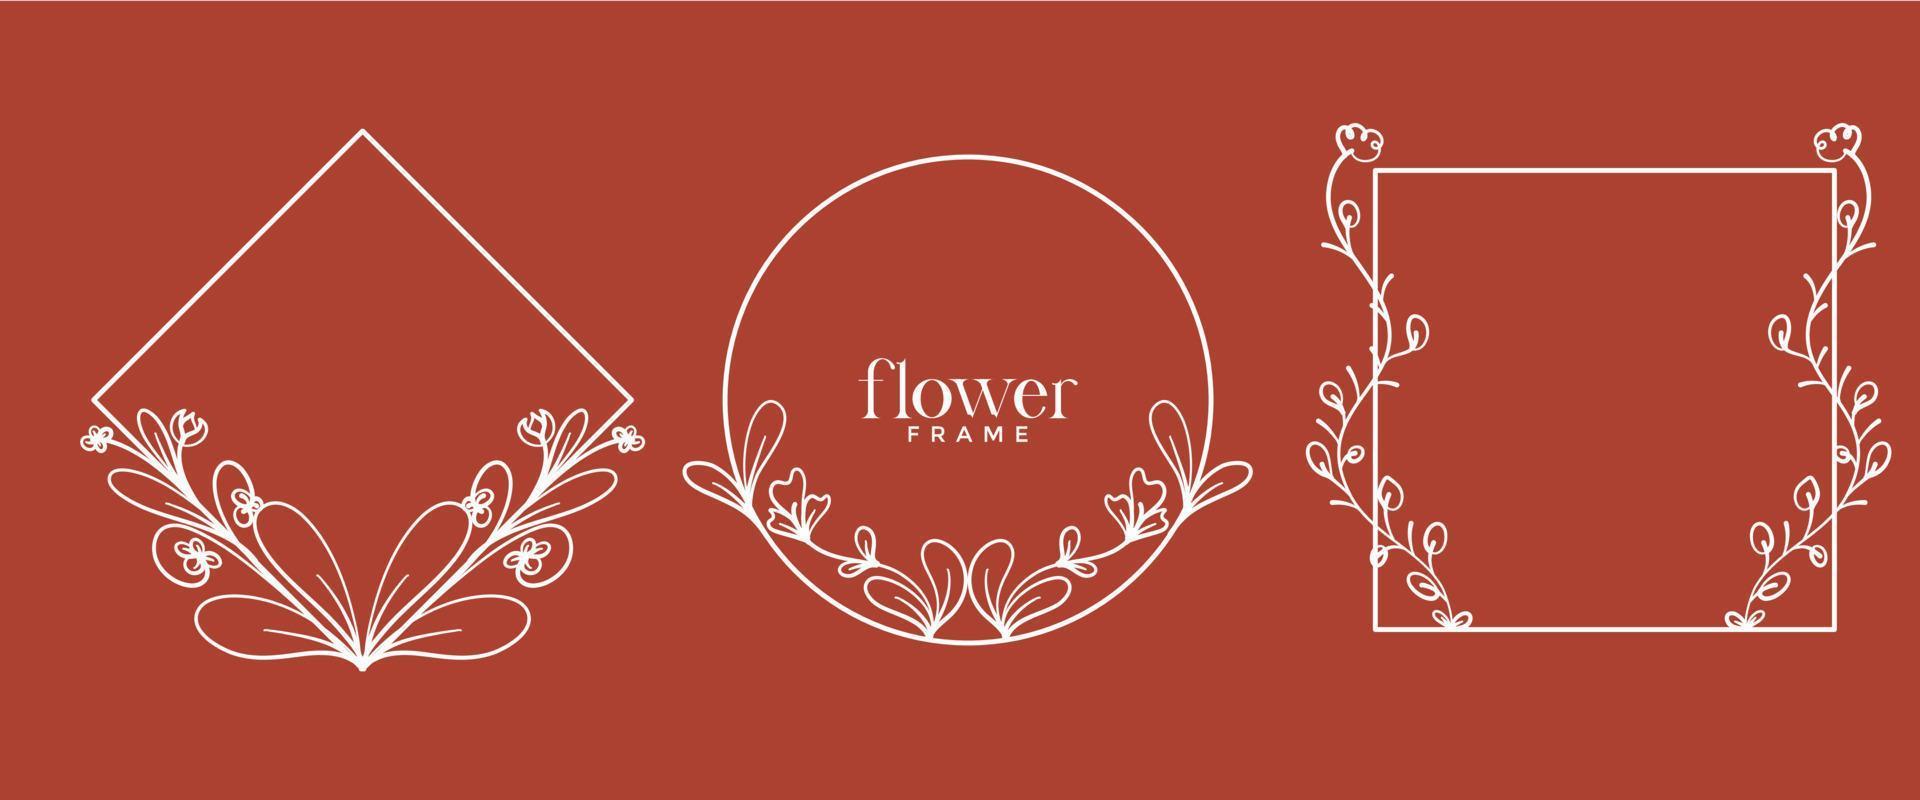 Hand drawn floral frame in line style. Set simple minimal wreath with floral branches and leaves. Vector logo template for labels, corporate identity, wedding invitations, greeting cards